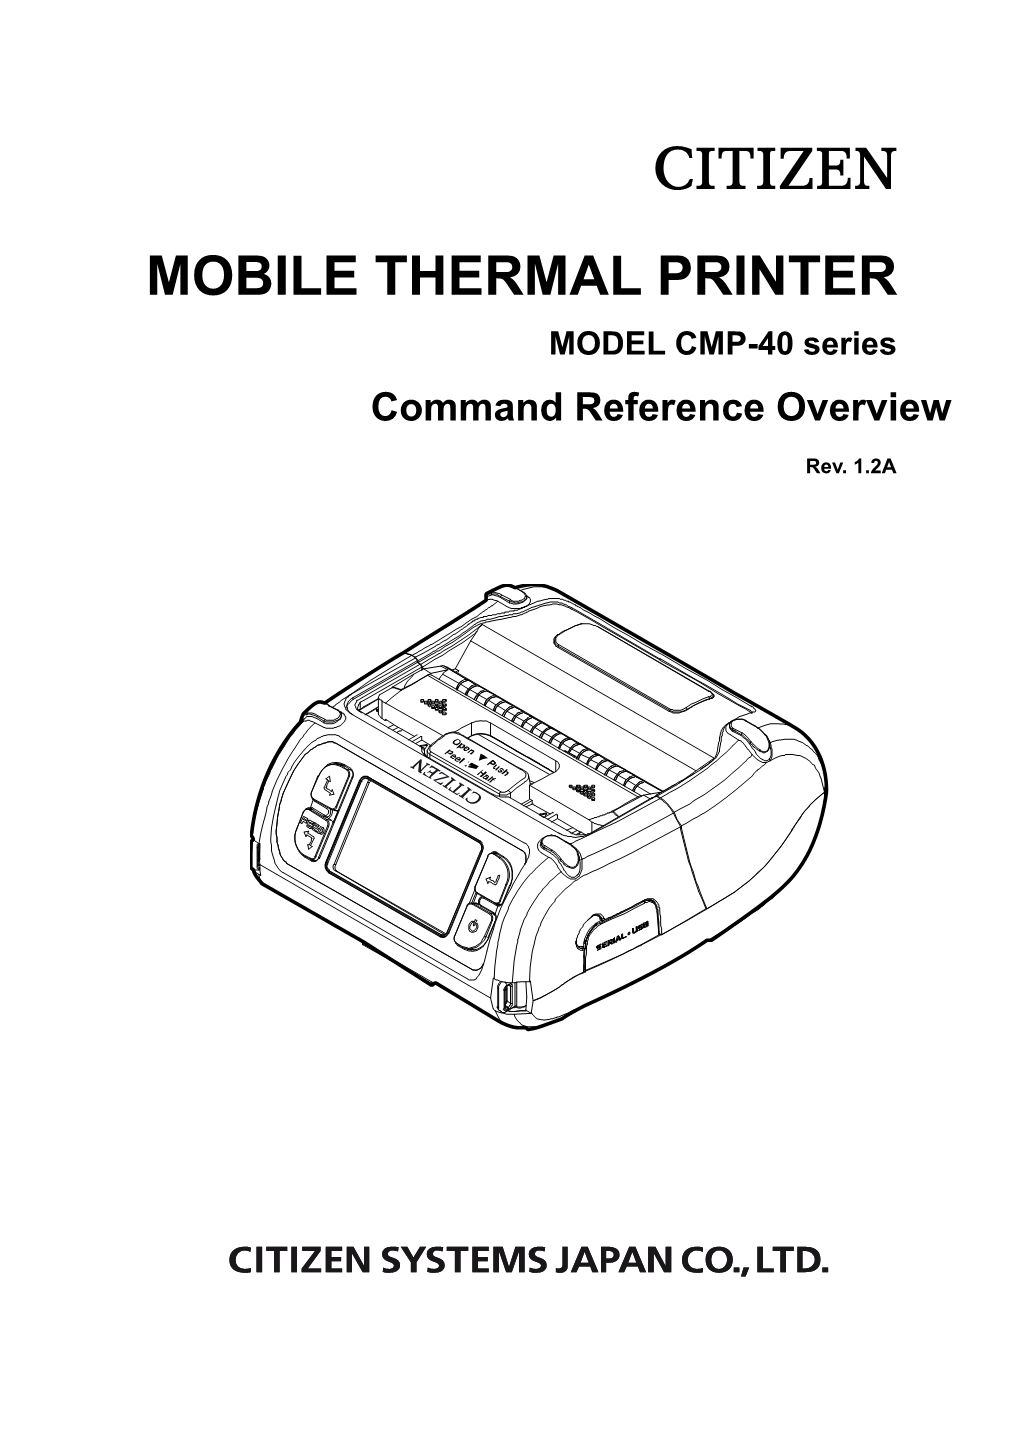 MOBILE THERMAL PRINTER MODEL CMP-40 Series Command Reference Overview